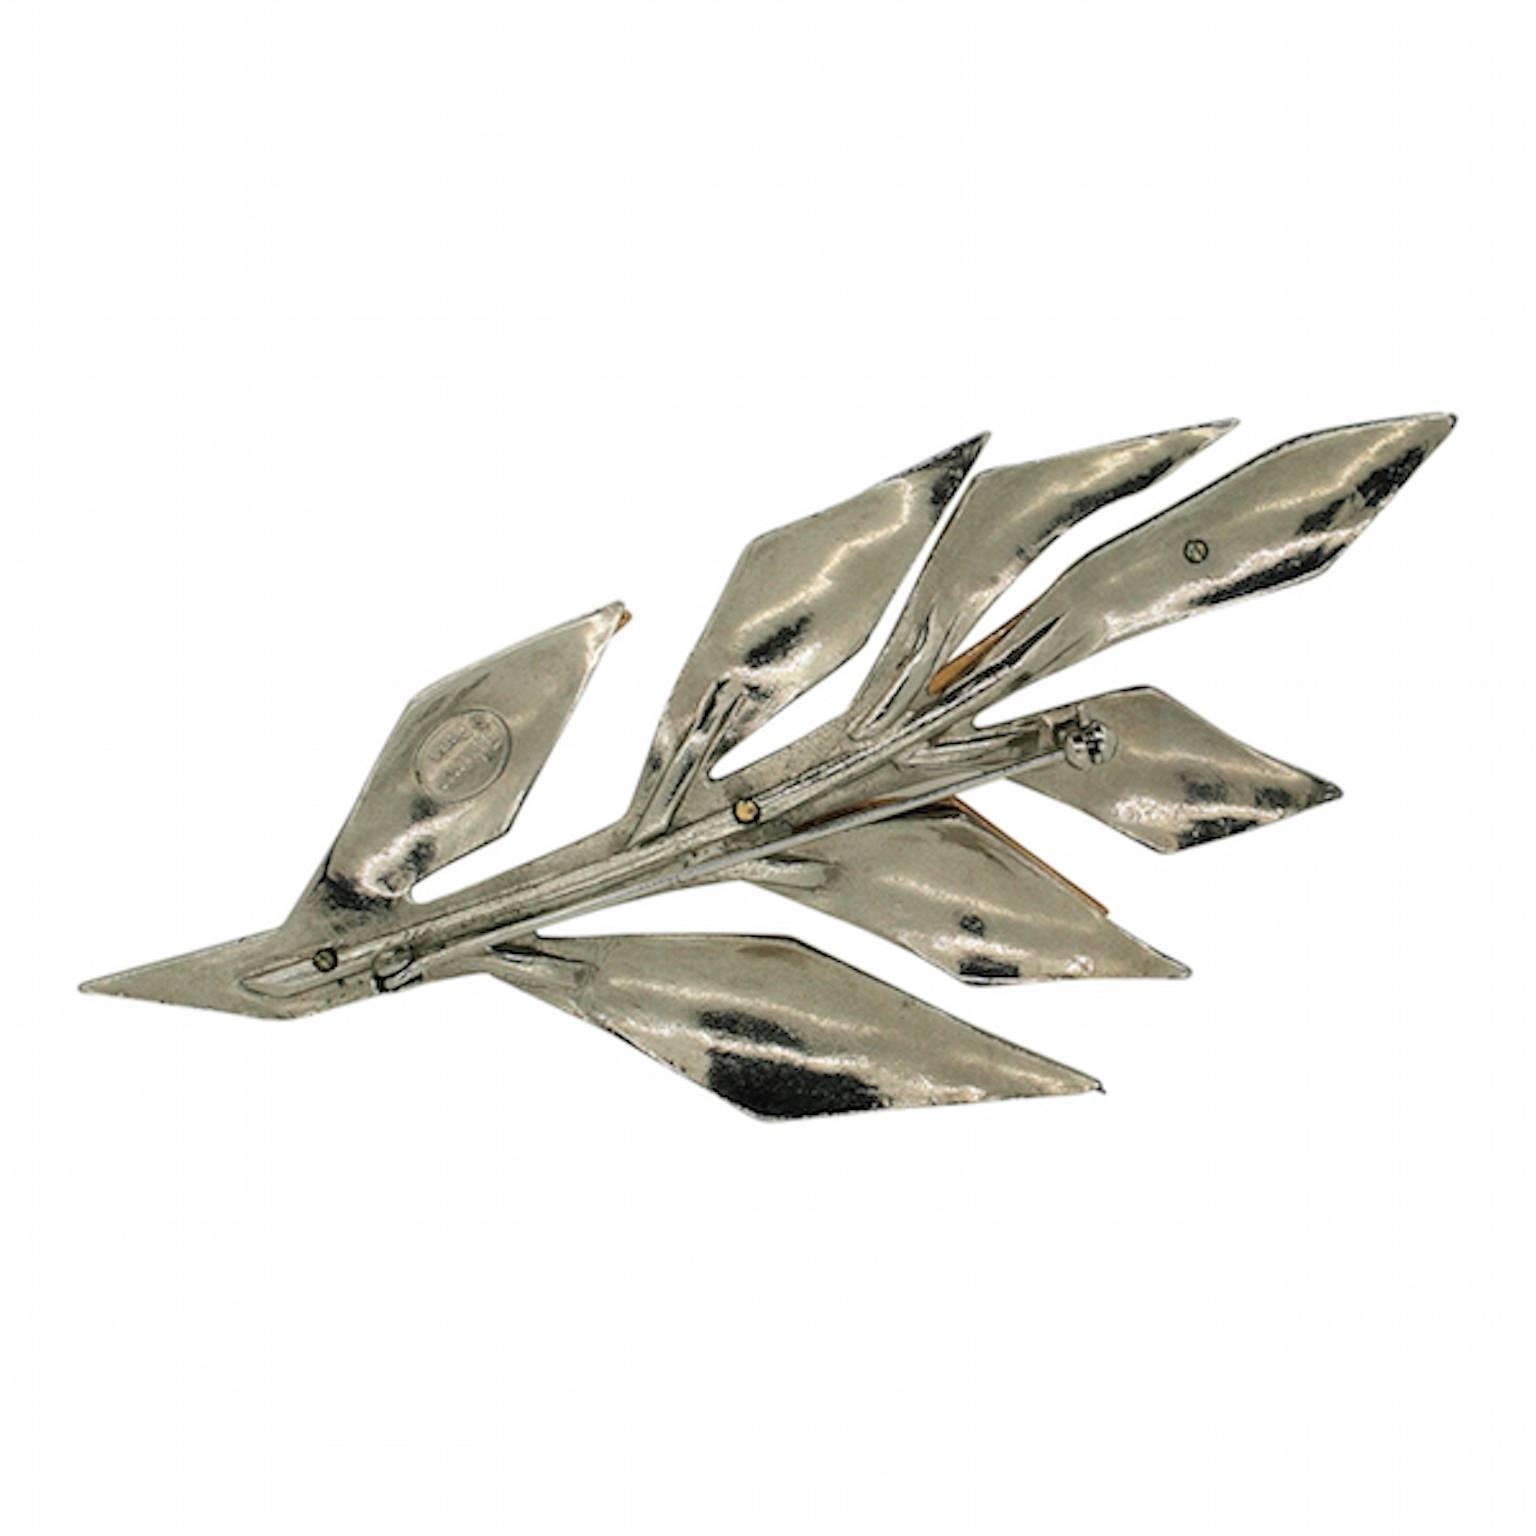 Beautiful French styling can be found in this leaf brooch by Jean Louis Scherrer. It dates from the 1980s.
Condition Report:
Very Good - Some minor wear to the gold tone metal, consistent with age and use. This is only visible upon very close